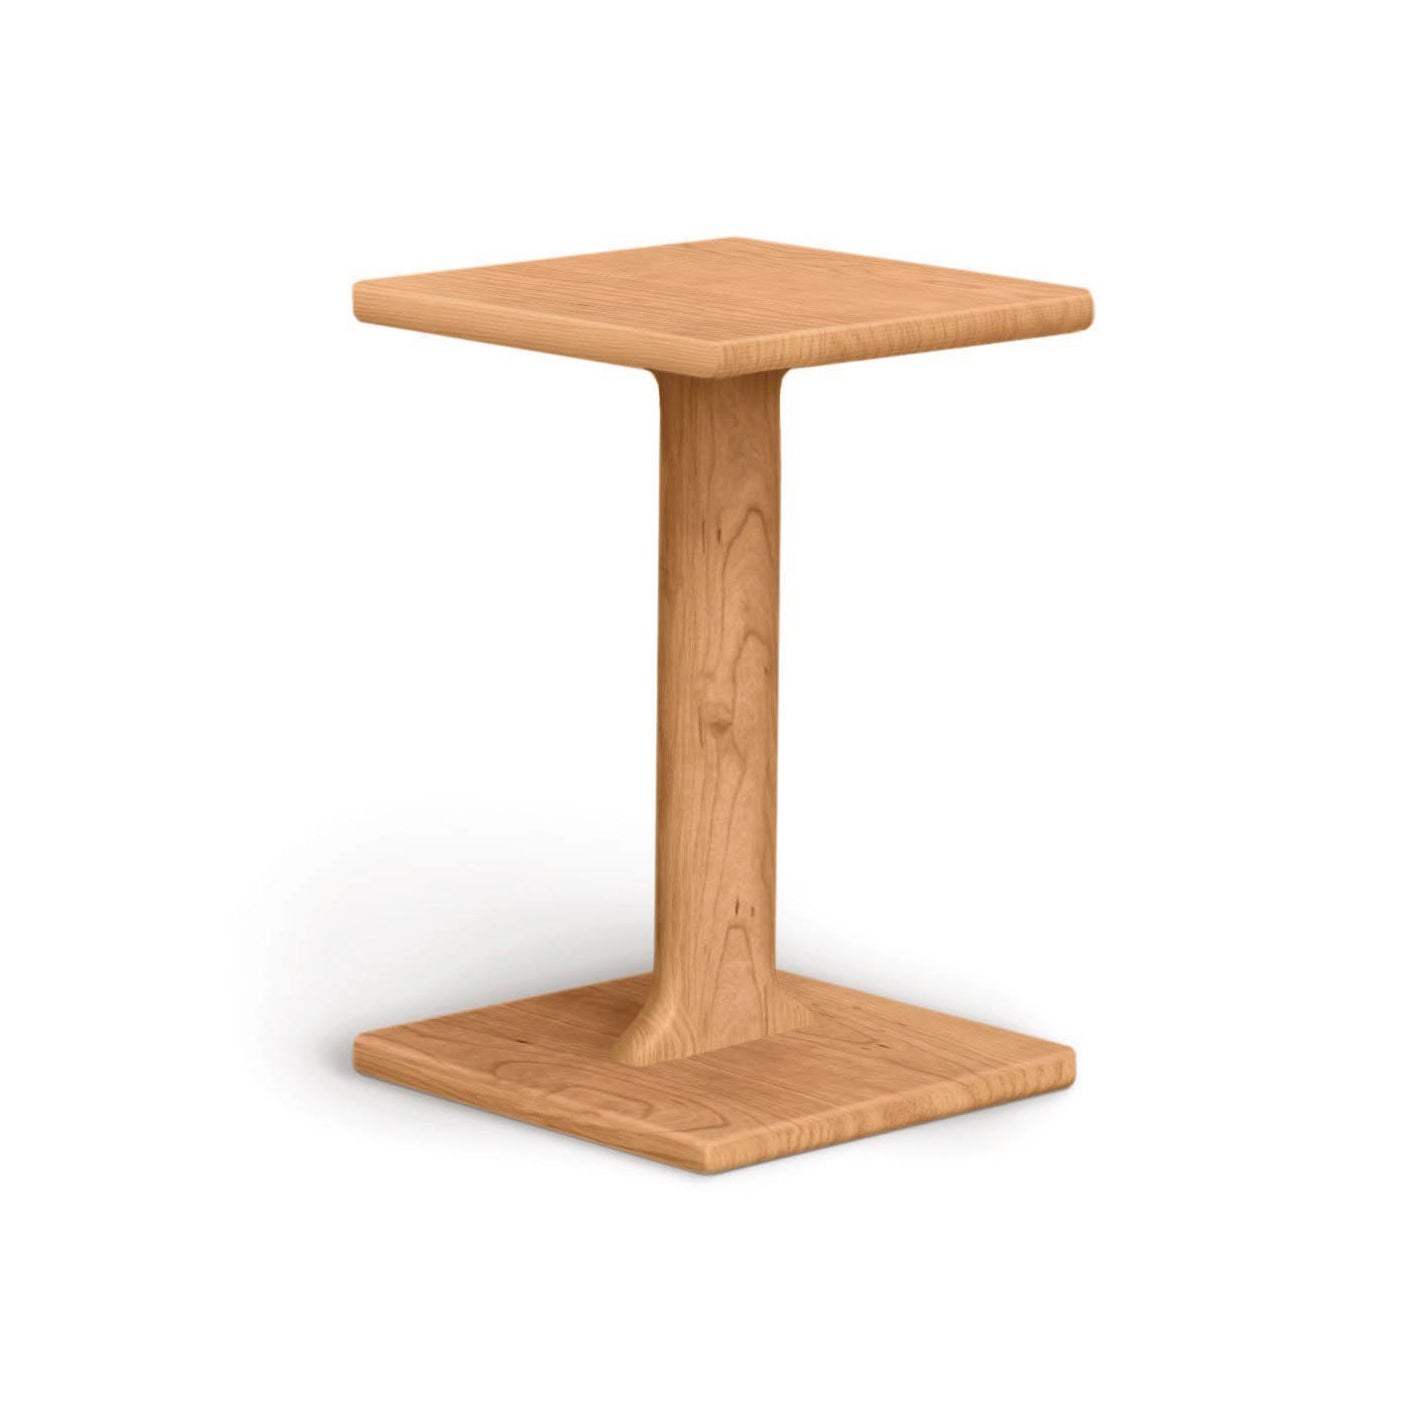 A Sierra Chair Table made from North American hardwood with a square top and base on a white background by Copeland Furniture.